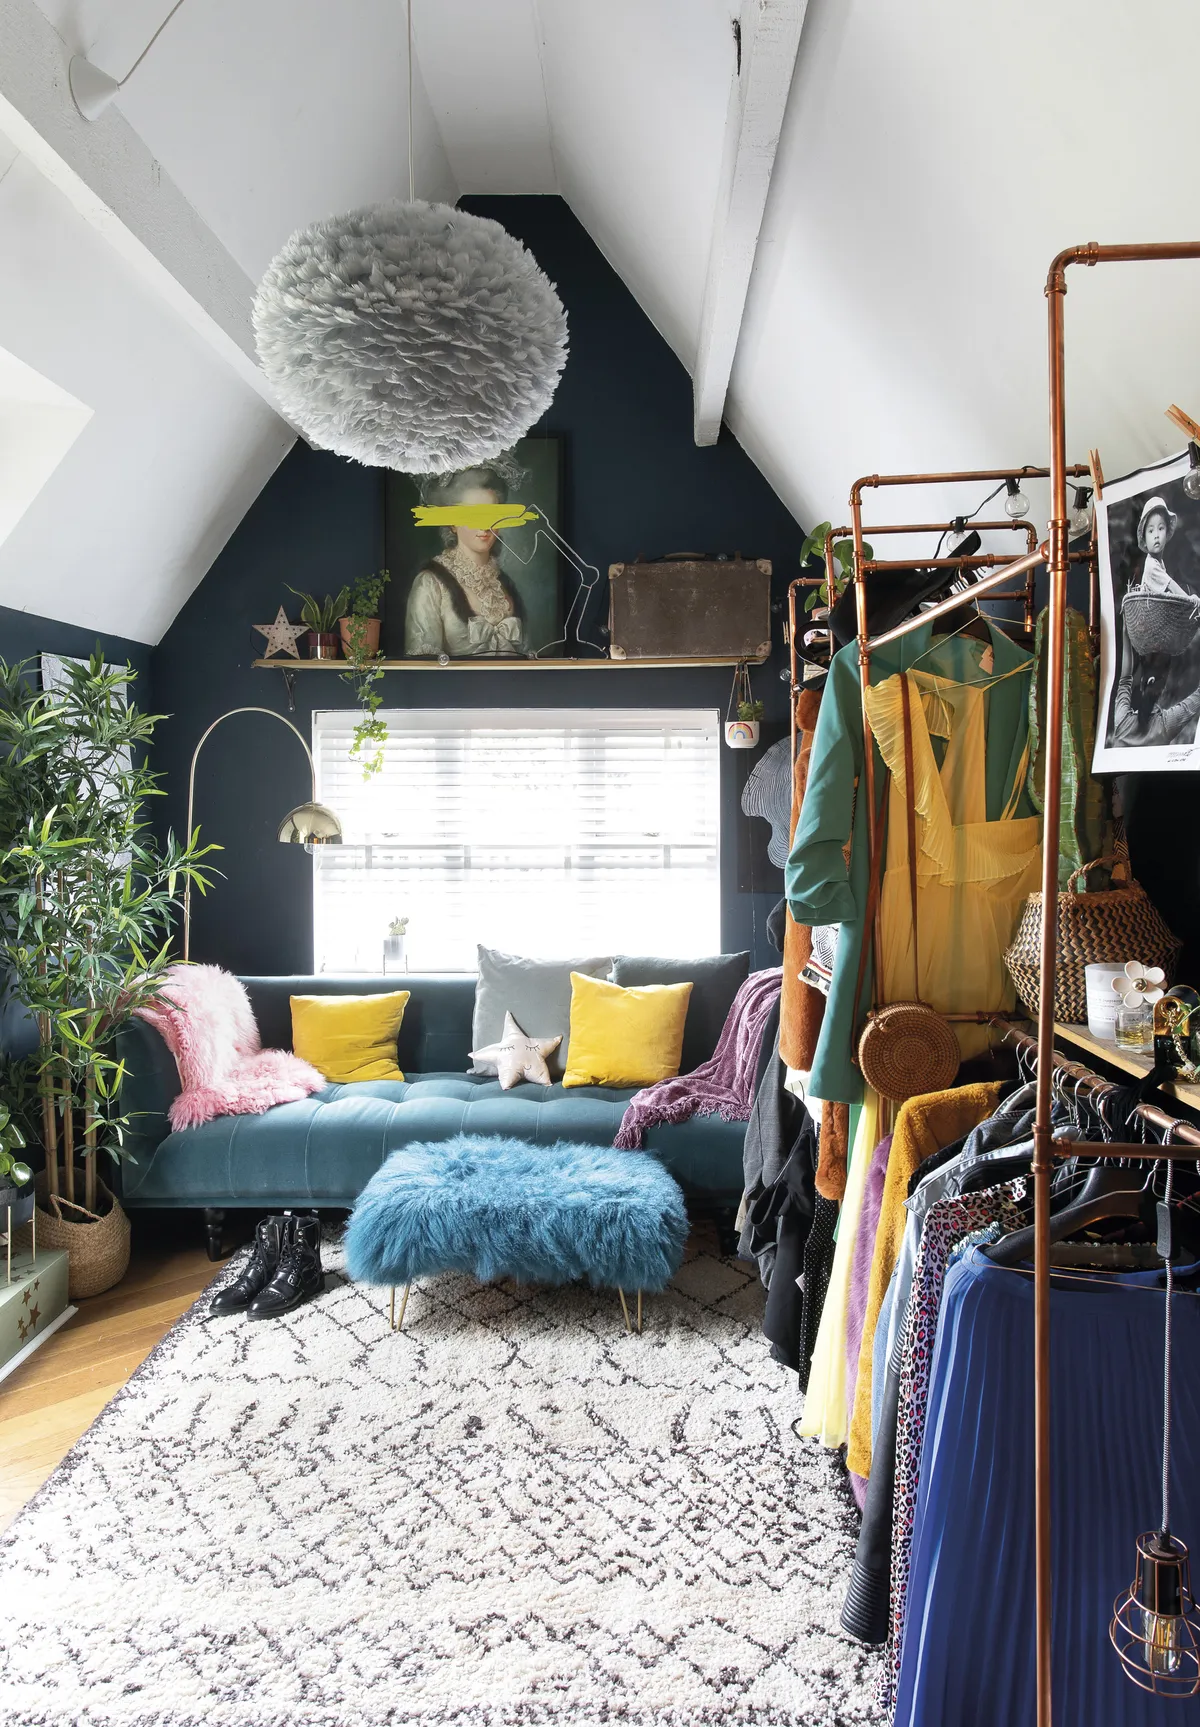 ‘Michael made the hanging rail from copper piping. I got the idea from Pinterest,’ Eniko shares. The walls are painted in Hague Blue by Farrow & Ball, and the teal sofa is from MADE, brightened up with accessories in rainbow hues